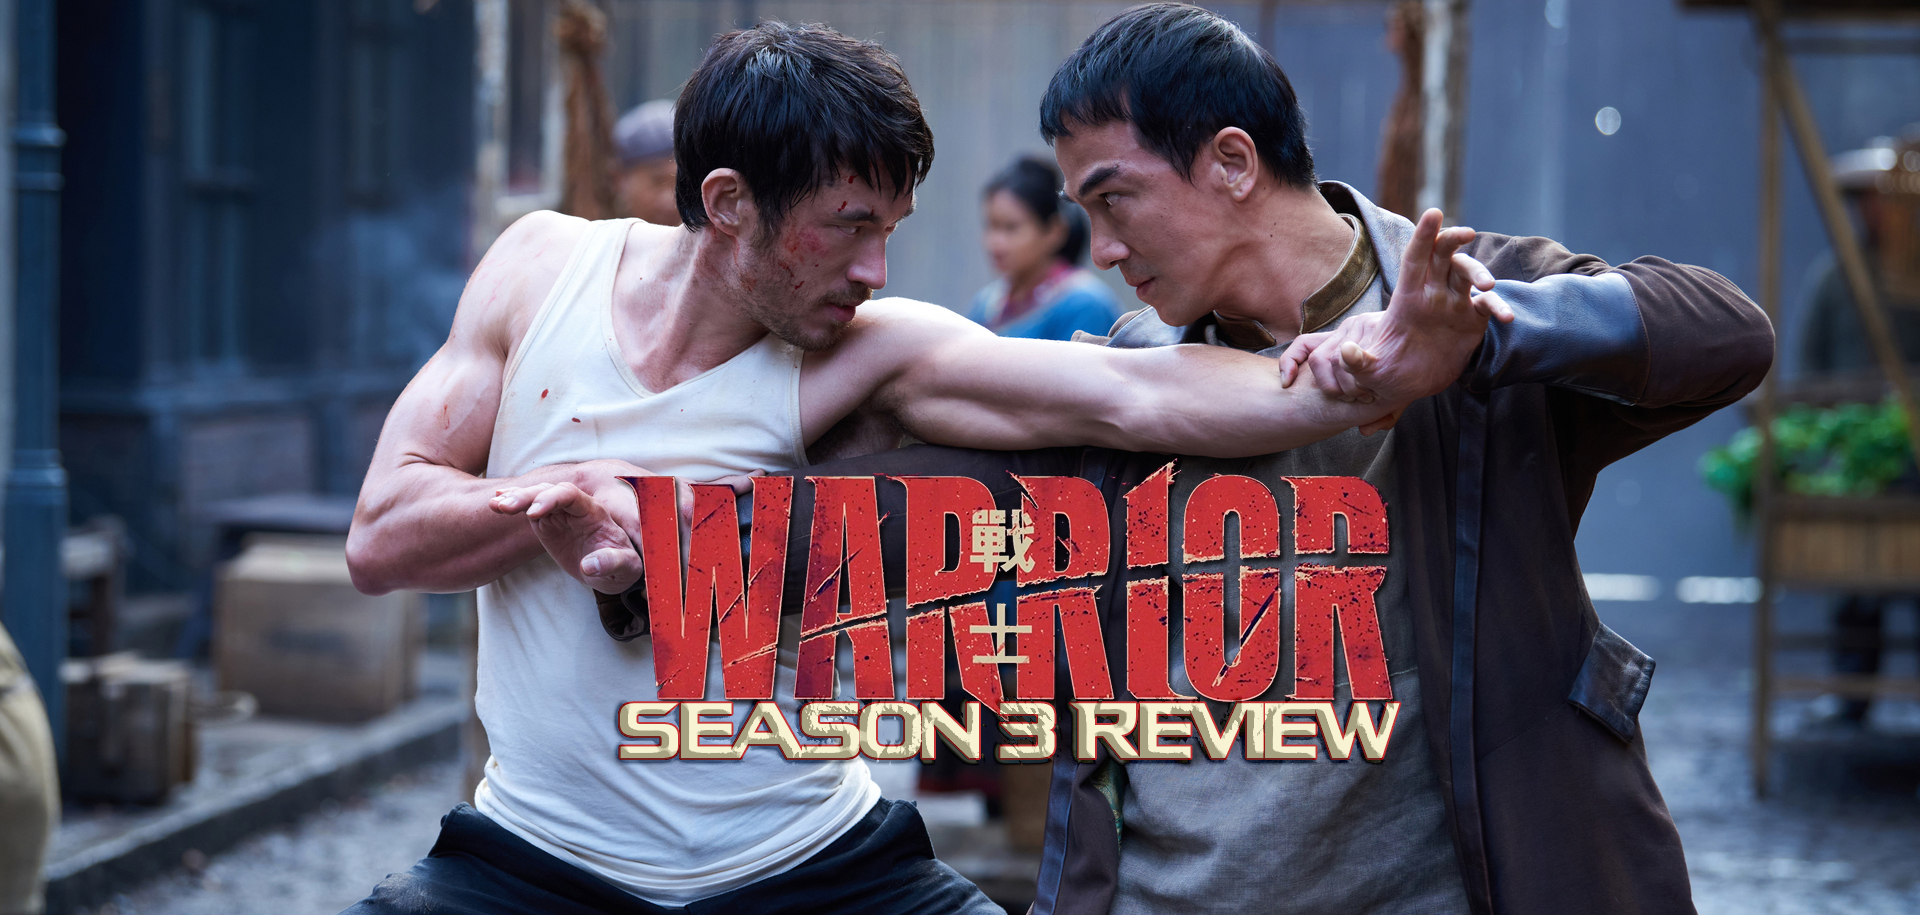 Warrior Season 3 Review - The Best Action-Drama Series of the